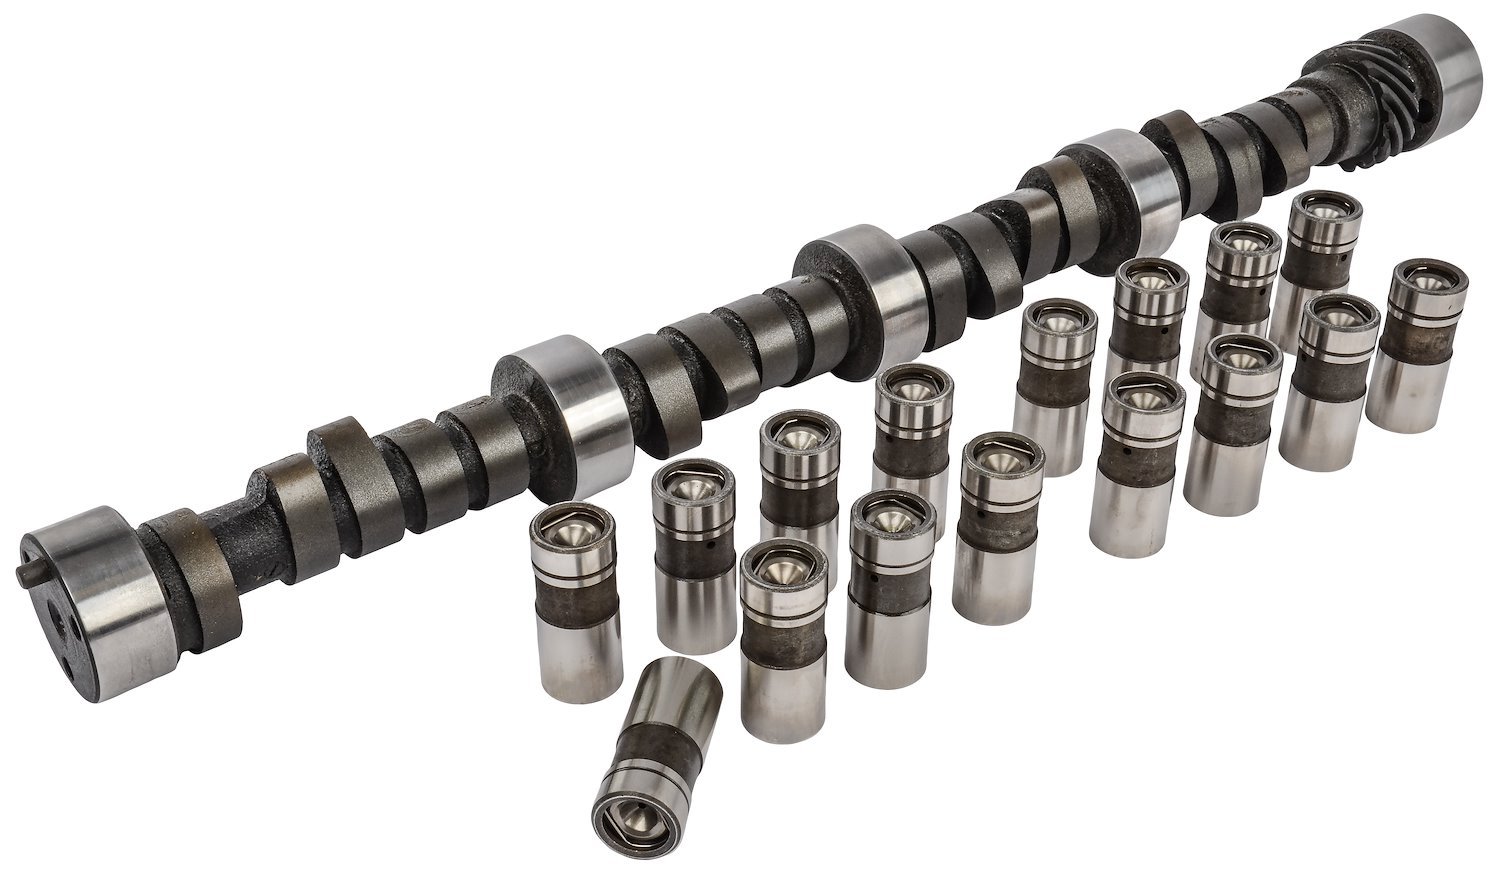 Hydraulic Flat Tappet Camshaft and Lifters for 1957-1985 Small Block Chevy 262-400 ci [1500-4000 RPM Range]